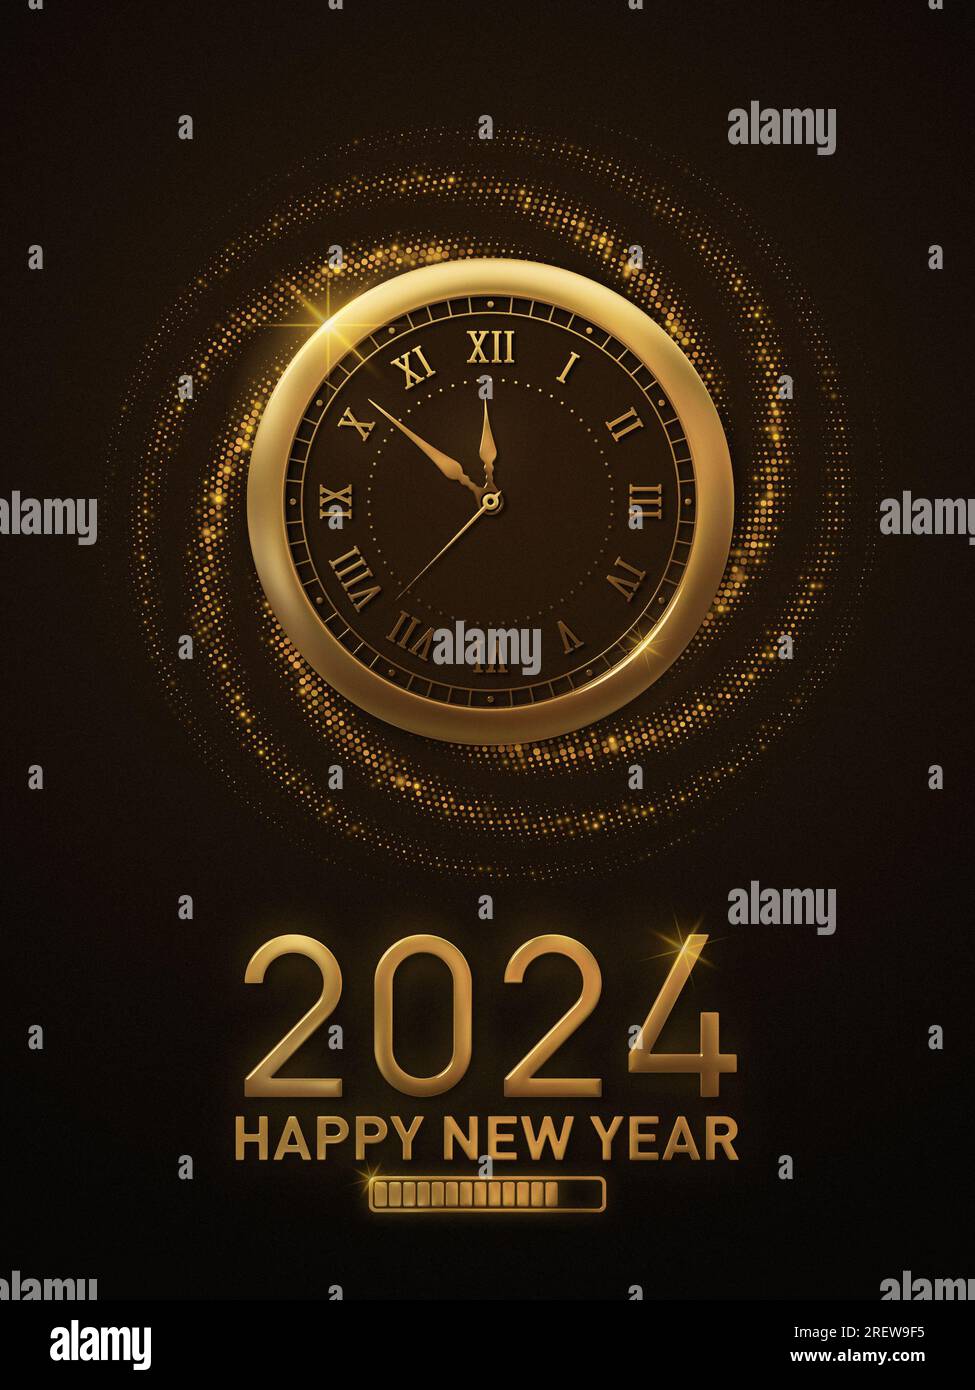 New Year 2024 Countdown Clock Shows the New Year 2024 loading with a metallic gold watch and glitter Stock Photo